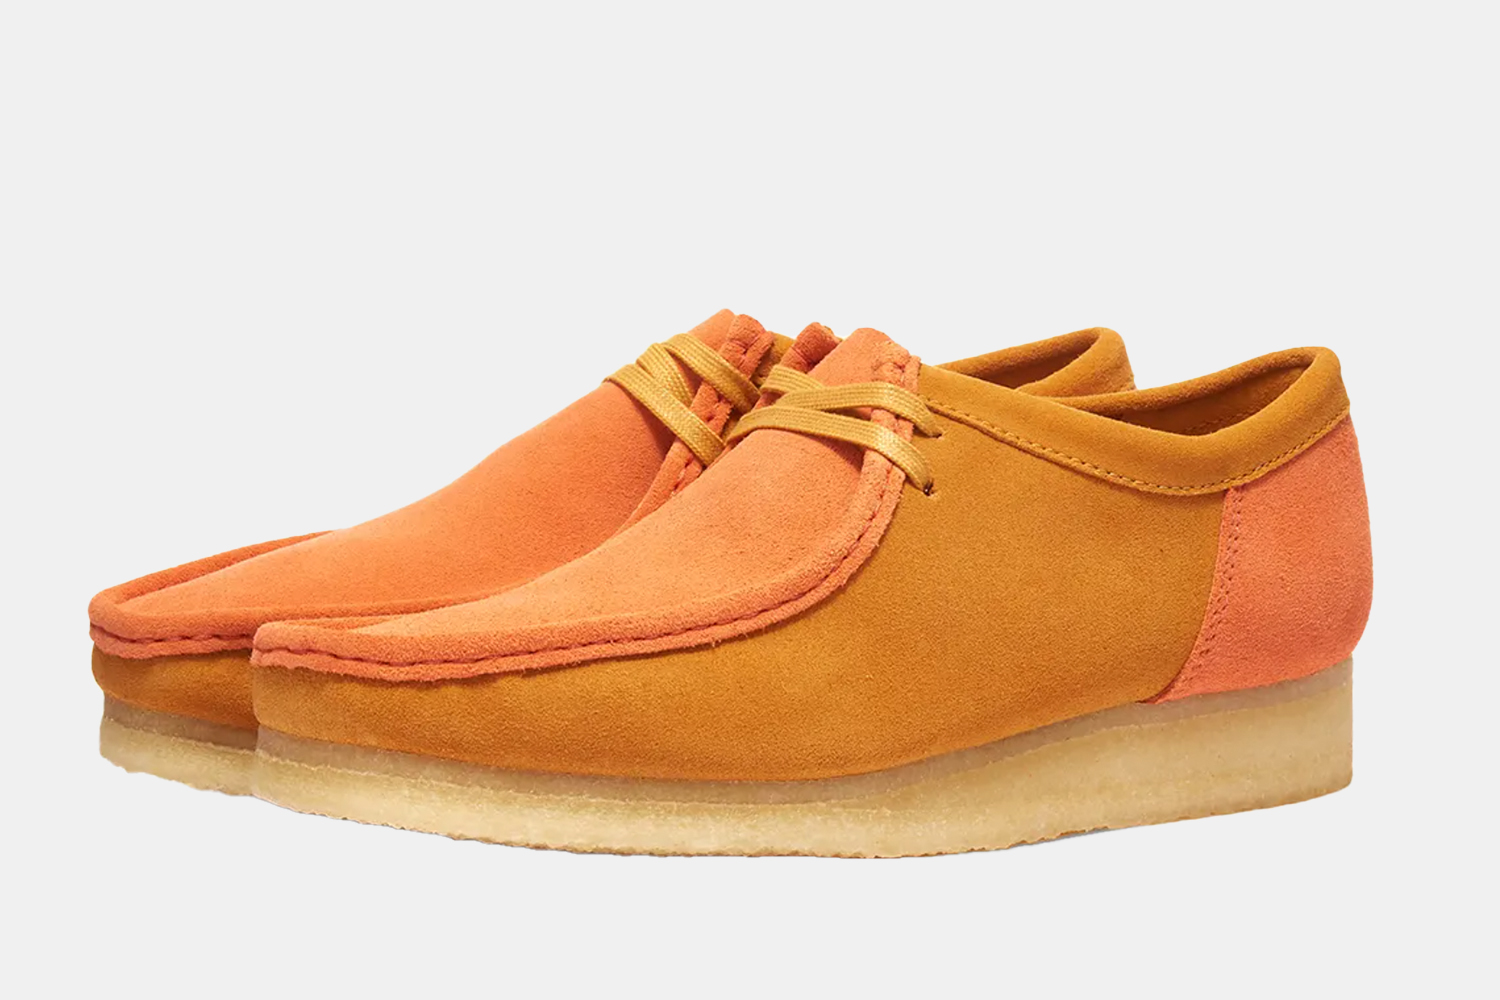 A Bunch of Clarks' Stylish Boots are on Sale at End - InsideHook